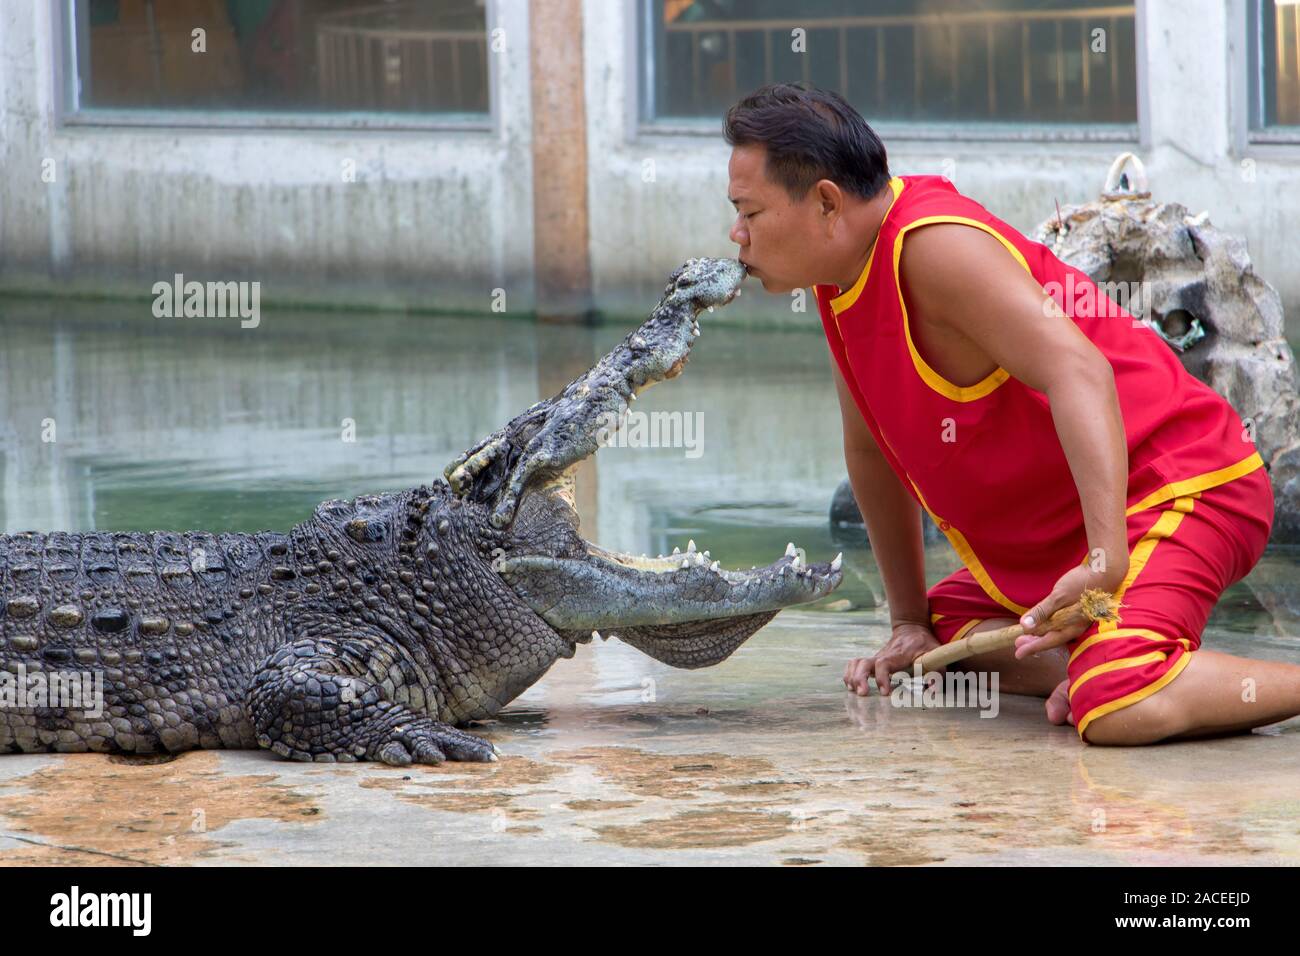 SAMUT PRAKAN, THAILAND, MAY 18 2019, Dangerous performance with wild animals.  The tamer kisses the crocodile snout Stock Photo - Alamy